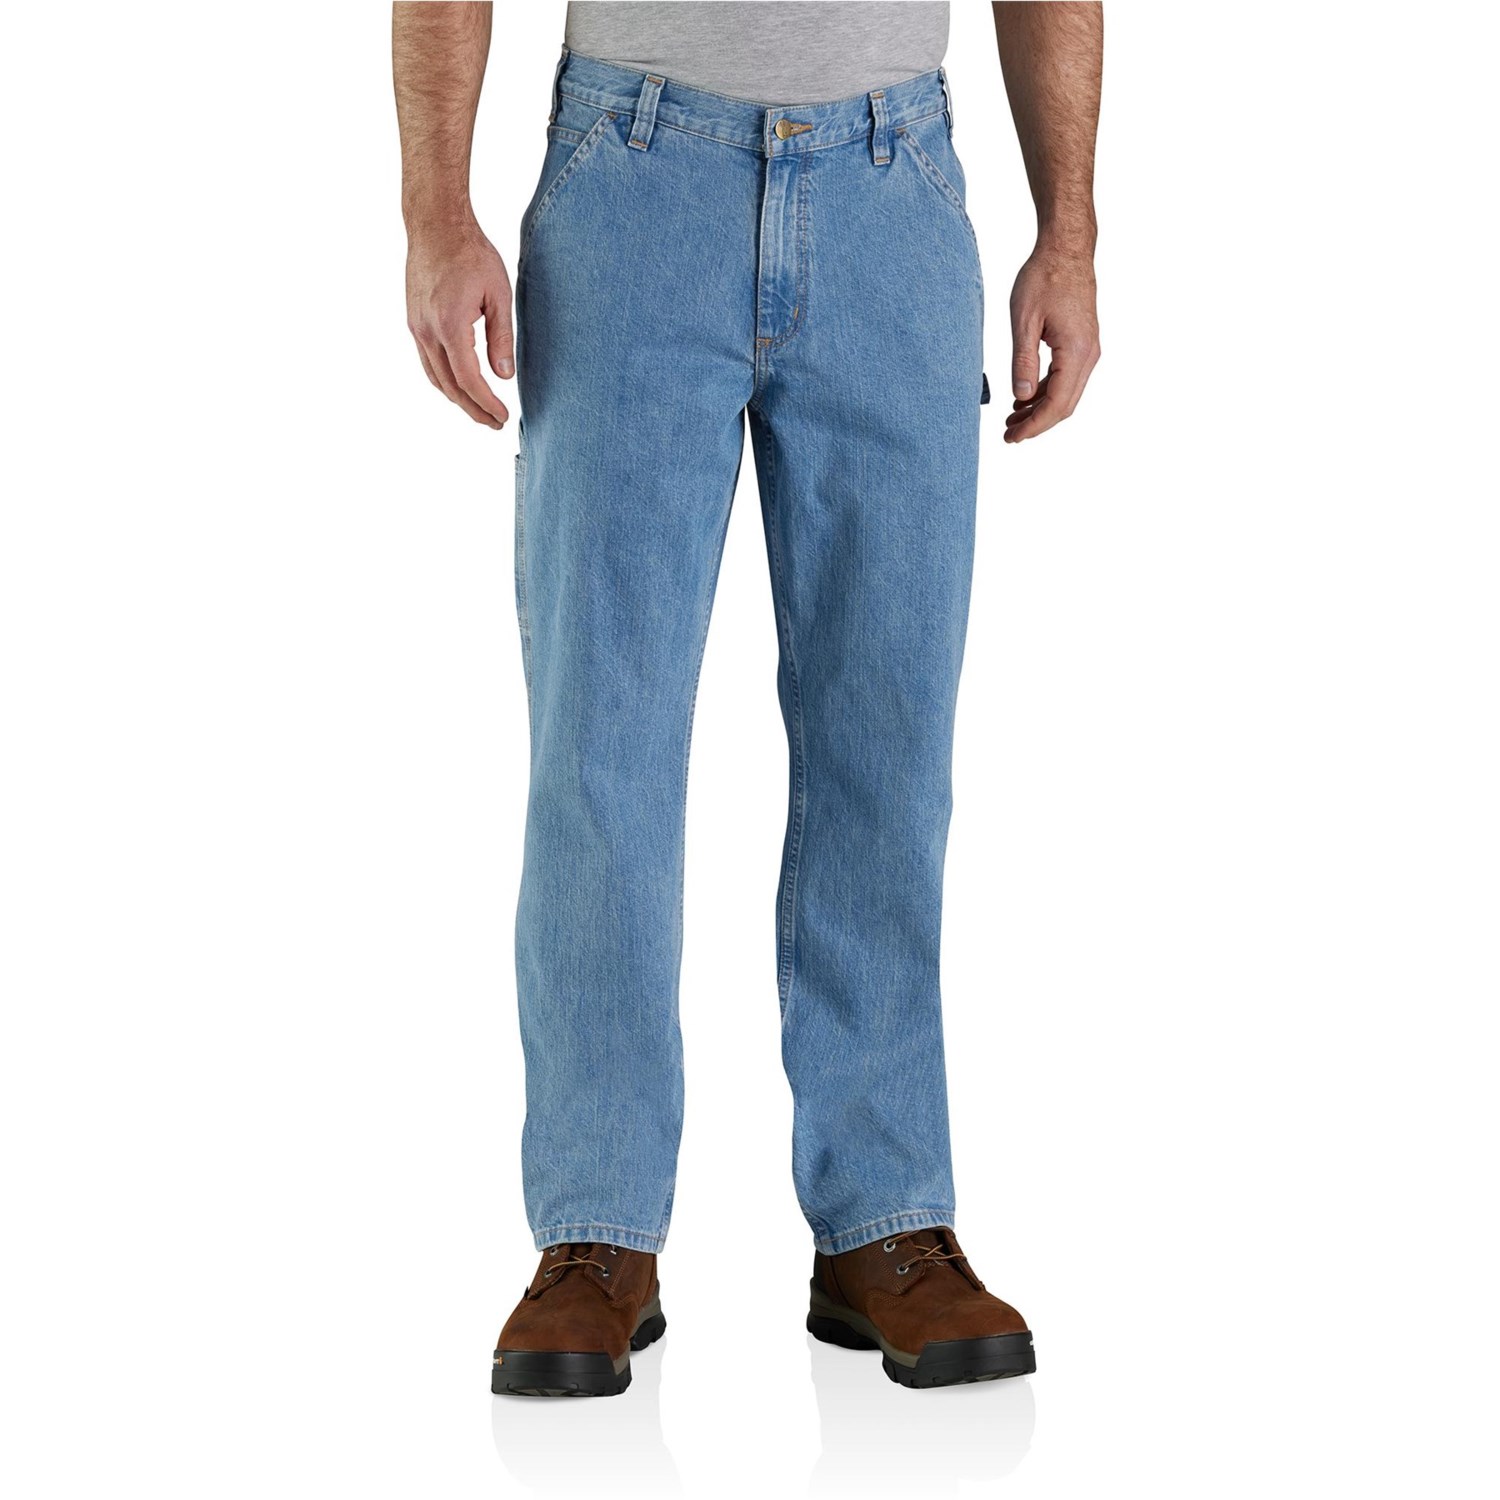 Carhartt 104941 Big Tall Fit Utility - Factory Seconds